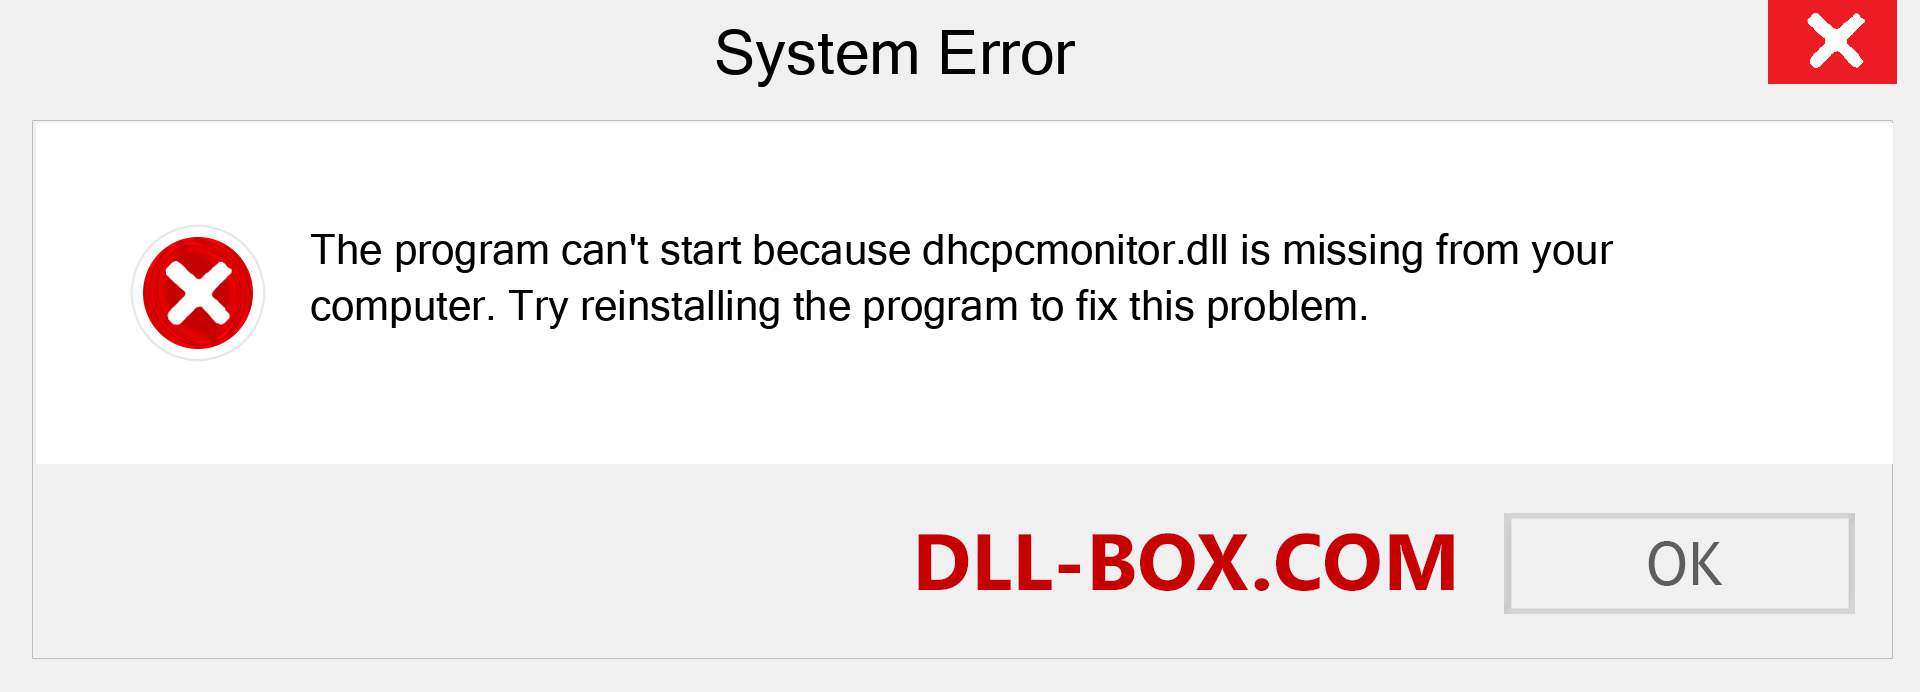  dhcpcmonitor.dll file is missing?. Download for Windows 7, 8, 10 - Fix  dhcpcmonitor dll Missing Error on Windows, photos, images